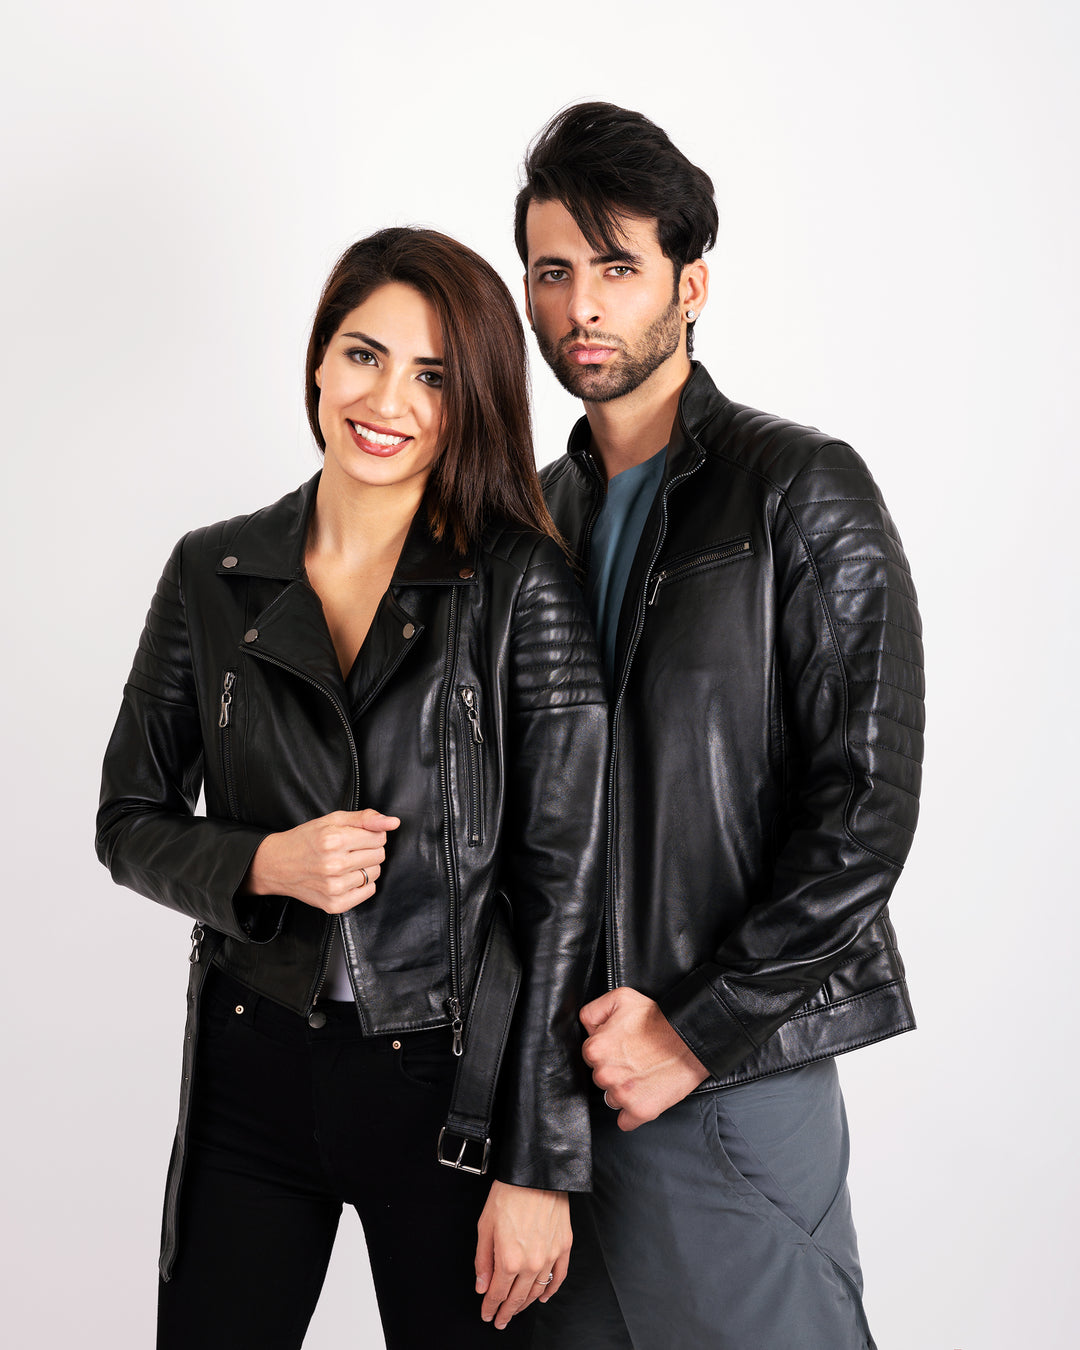 Matching Leather Jacket for Him and Her